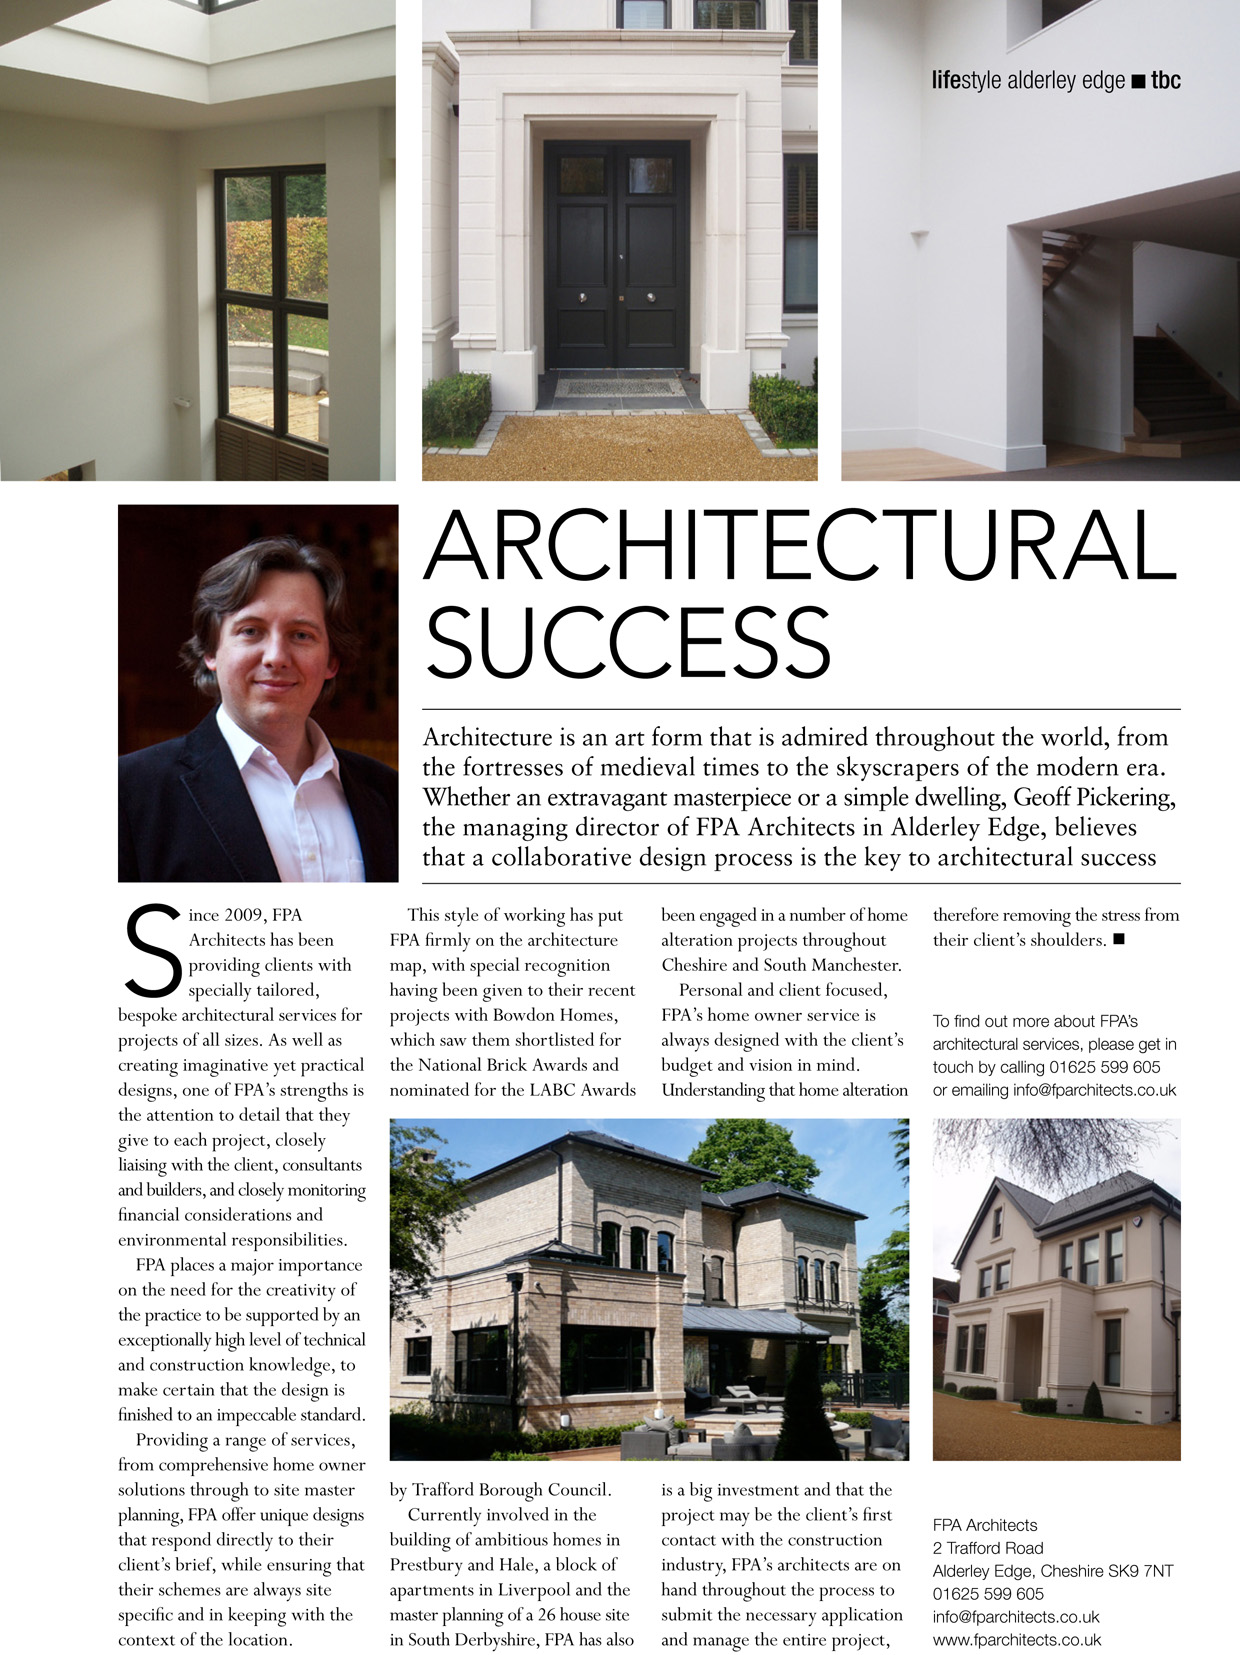 FPA architects Alderley Edge Live-Cheshire Feature